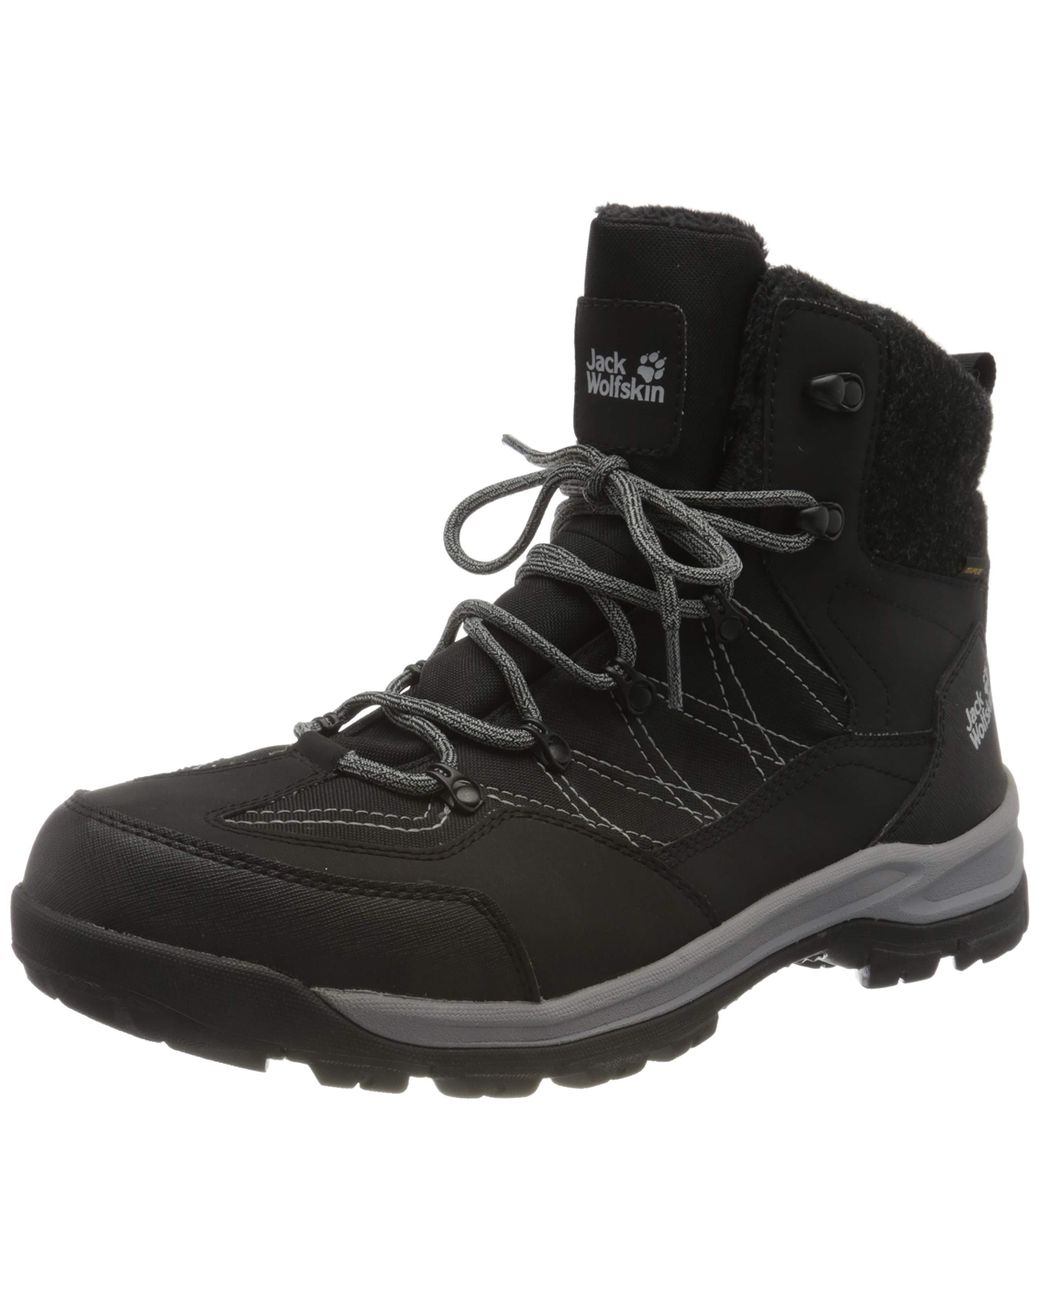 Jack Wolfskin Aspen Texapore Mid M Snow Boot in Black Grey (Black) for ...